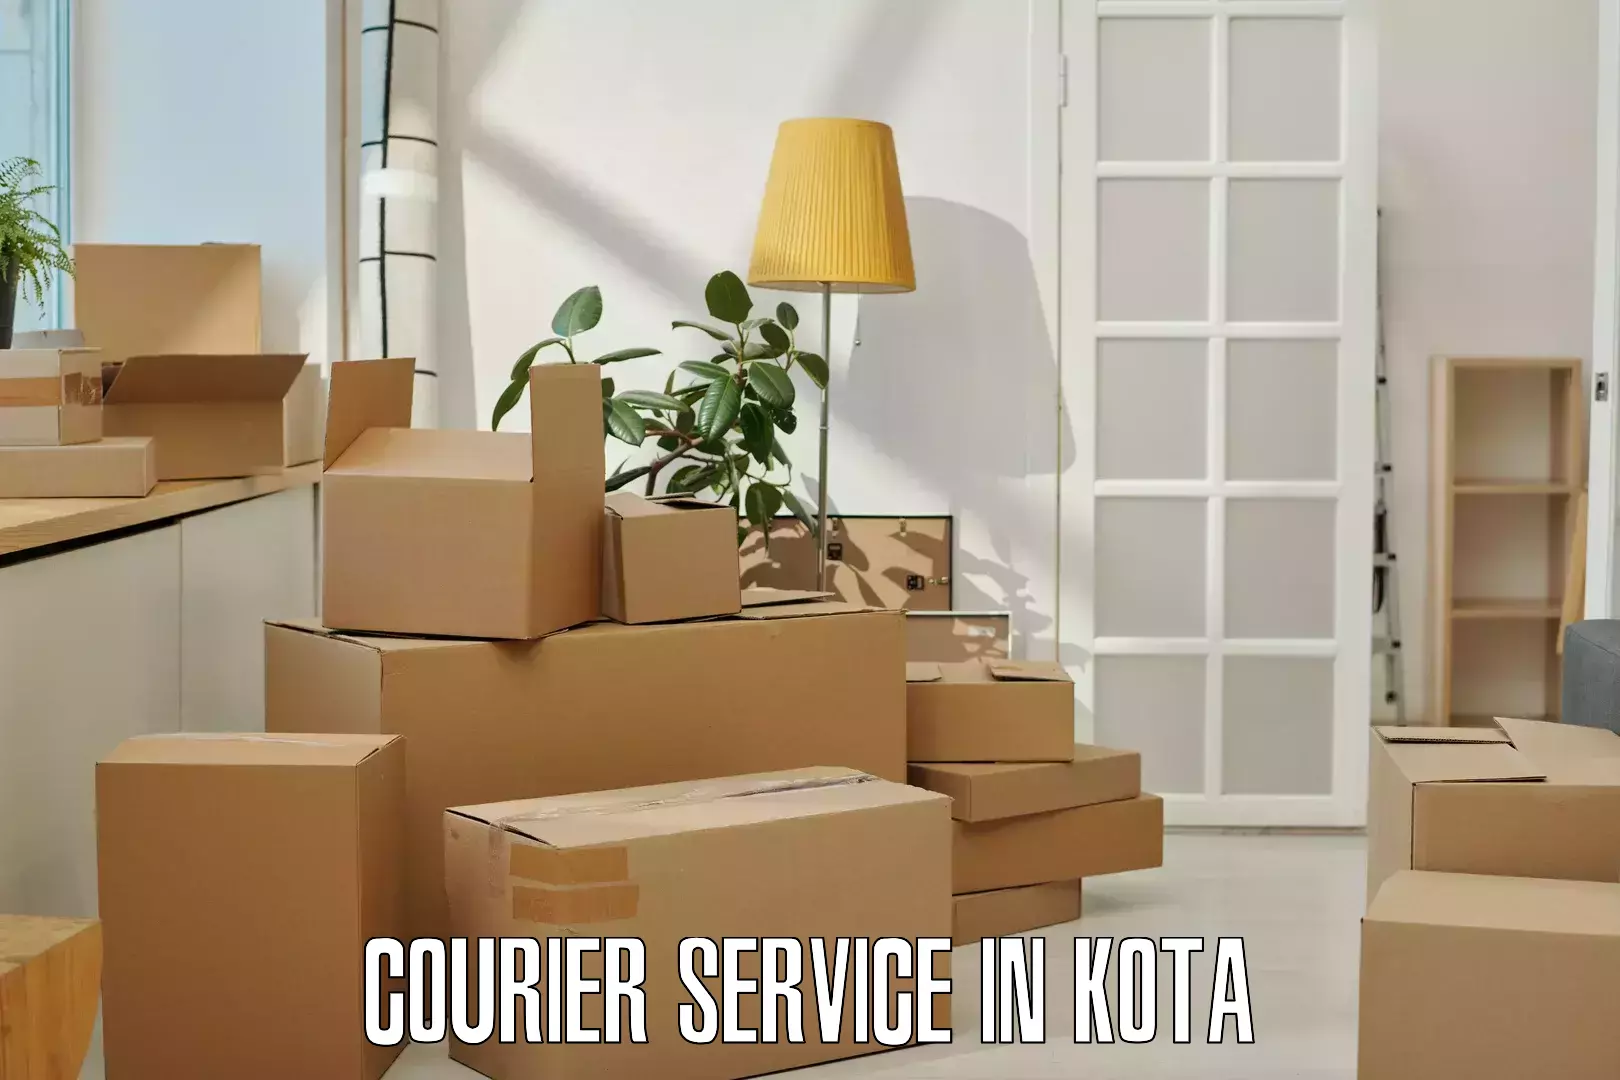 Subscription-based courier in Kota